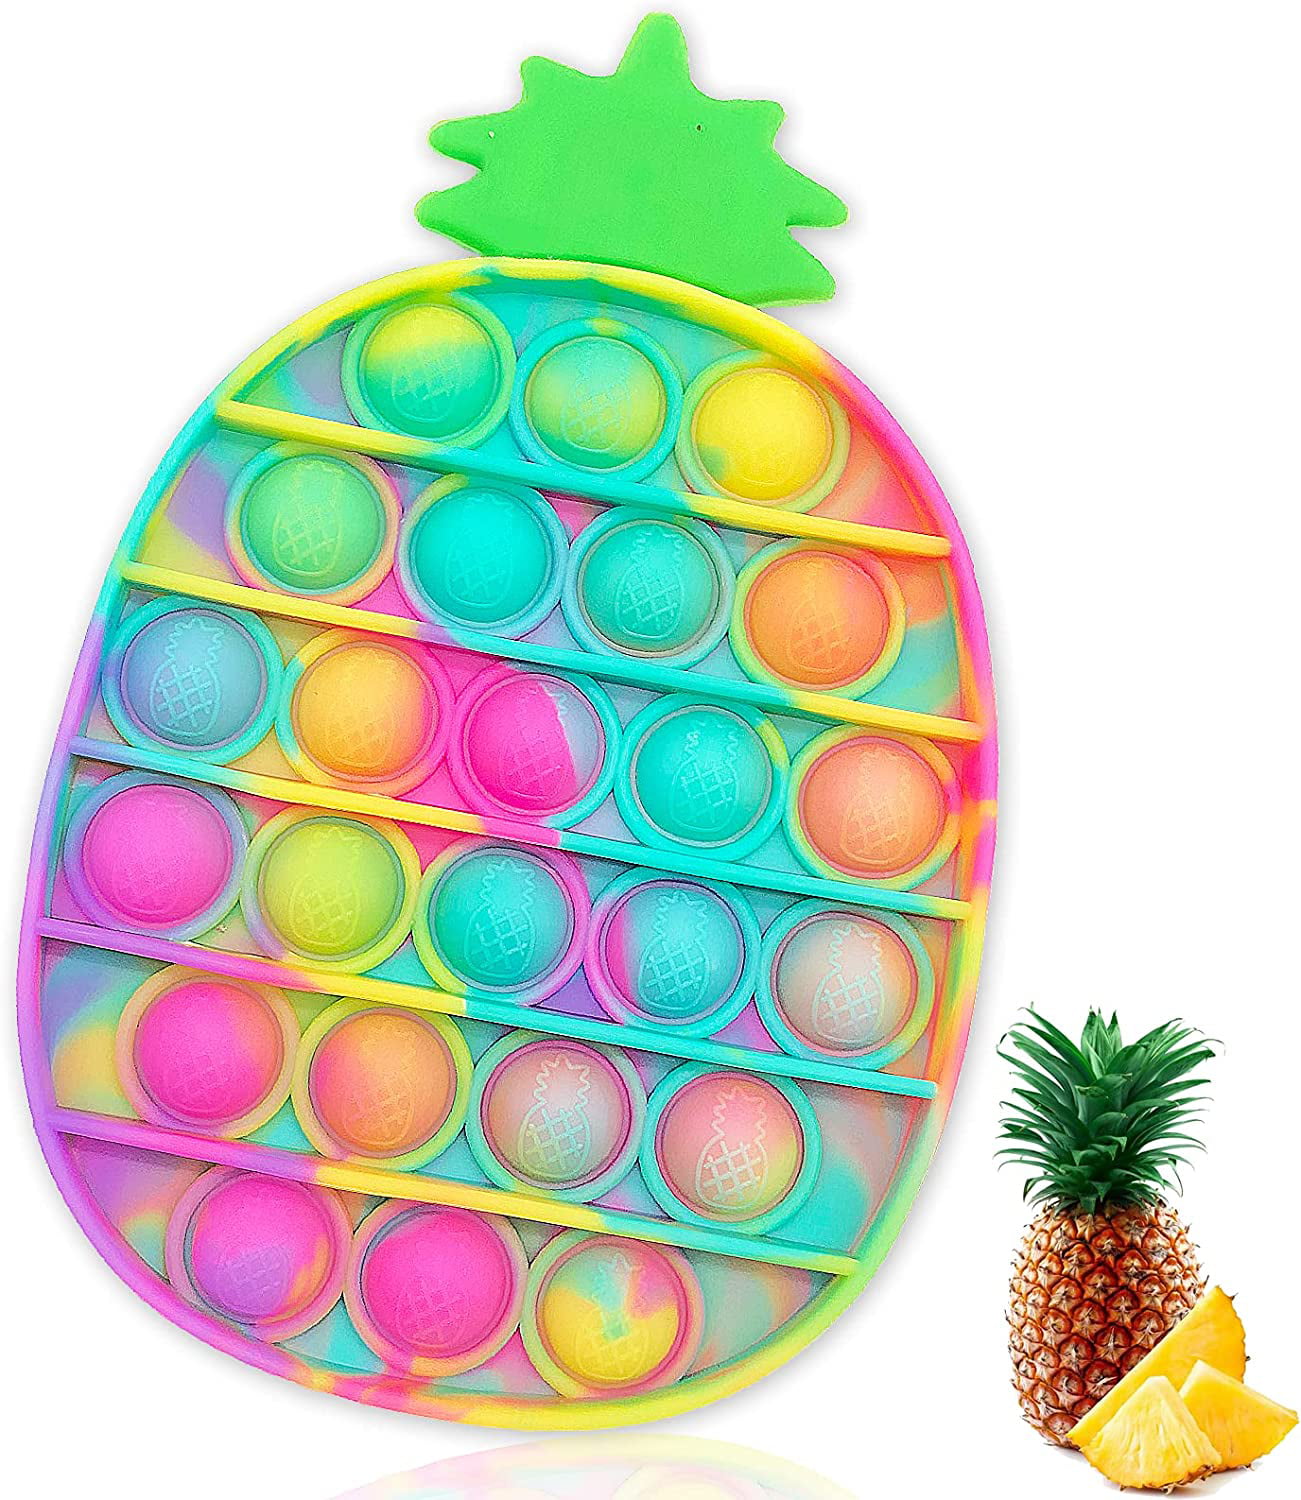 Silicon Stress Relief Autism Special Needs Squeeze Toy Gift for Children Pineapple-Rainbow Elders and Adults Push Popping Bubble Pineapple Shape Sensory Fidget Toy